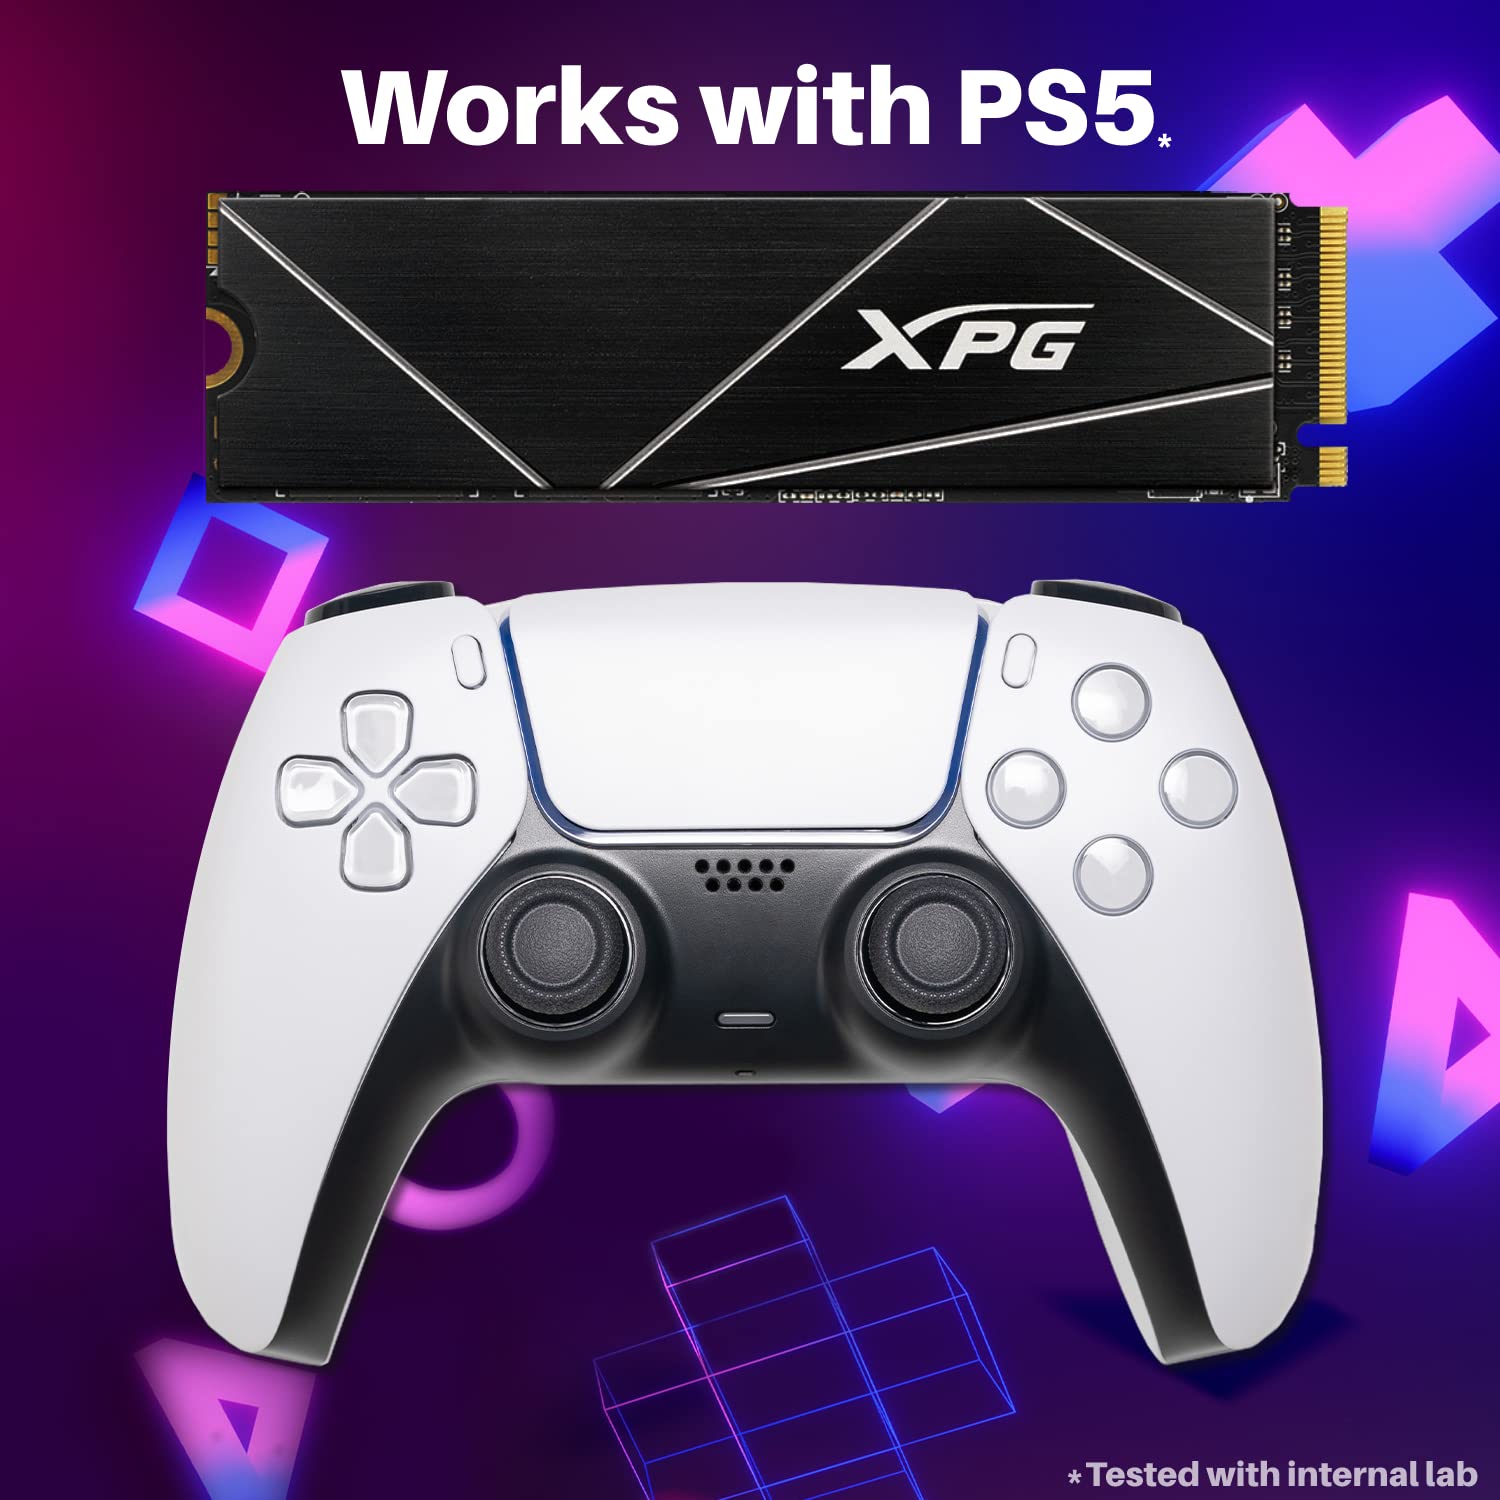 XPG 4TB GAMMIX S70 Blade PCIe Gen4 M.2 2280 Internal Gaming SSD Up to 7,400 MB/s - Works with Playstation 5/ PS5 (AGAMMIXS70B-4T-CS)